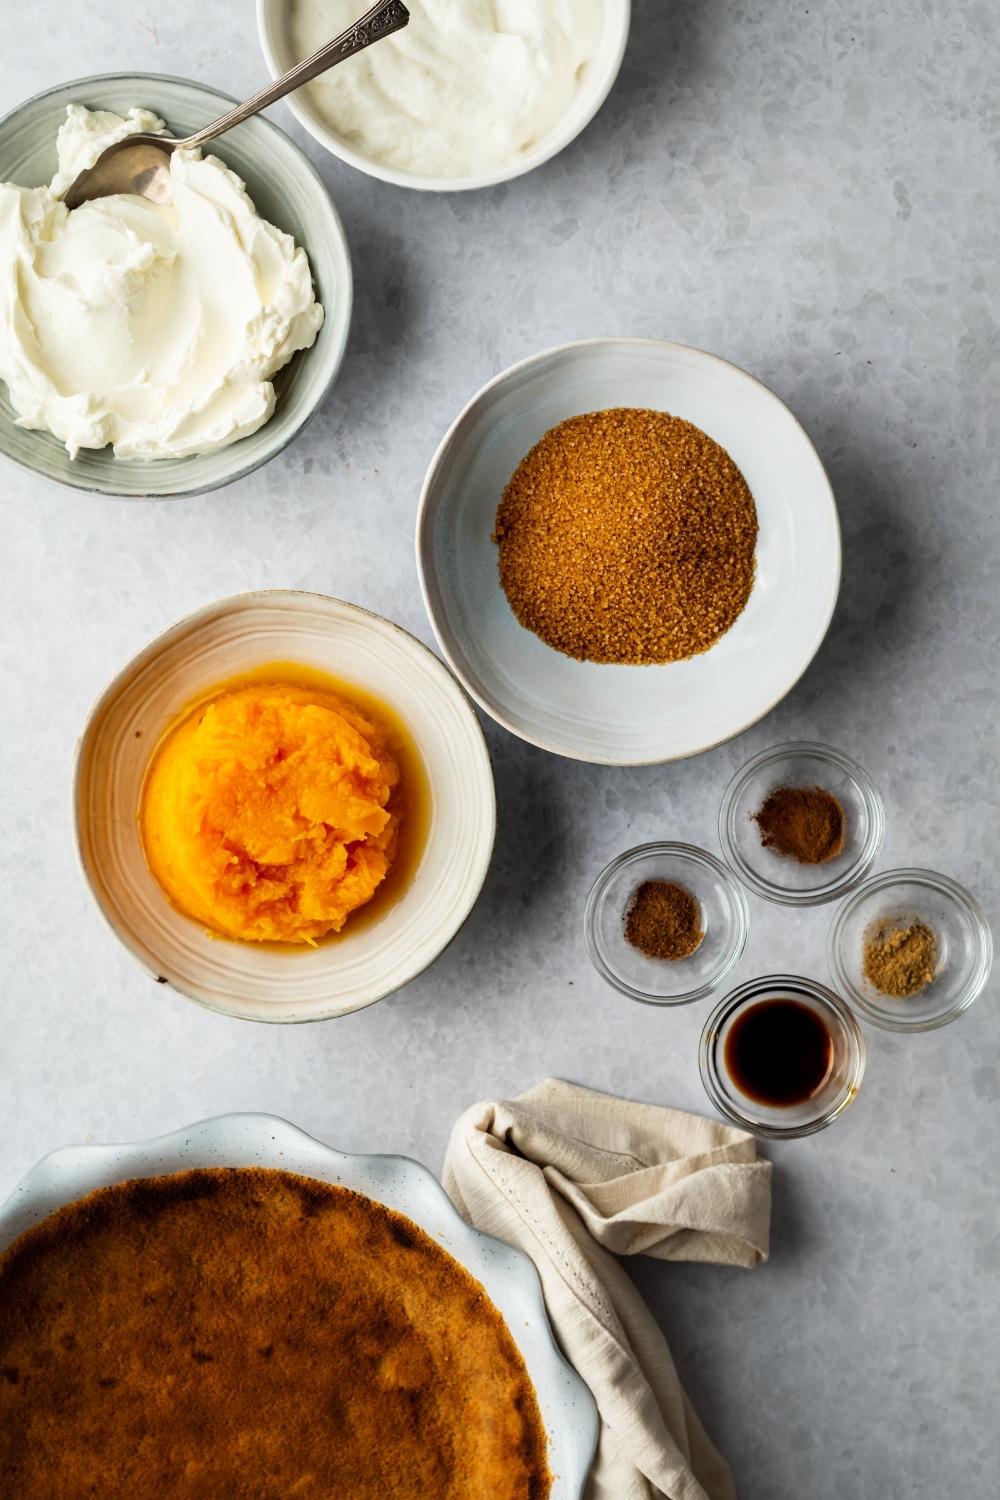 A bowl of pumpkin puree, a bowl of brown sugar, a bowl of vanilla extract, a bowl of cinnamon, a small bowl of nutmeg, a bowl of cream cheese, and part of a pie crust all on a grey counter.